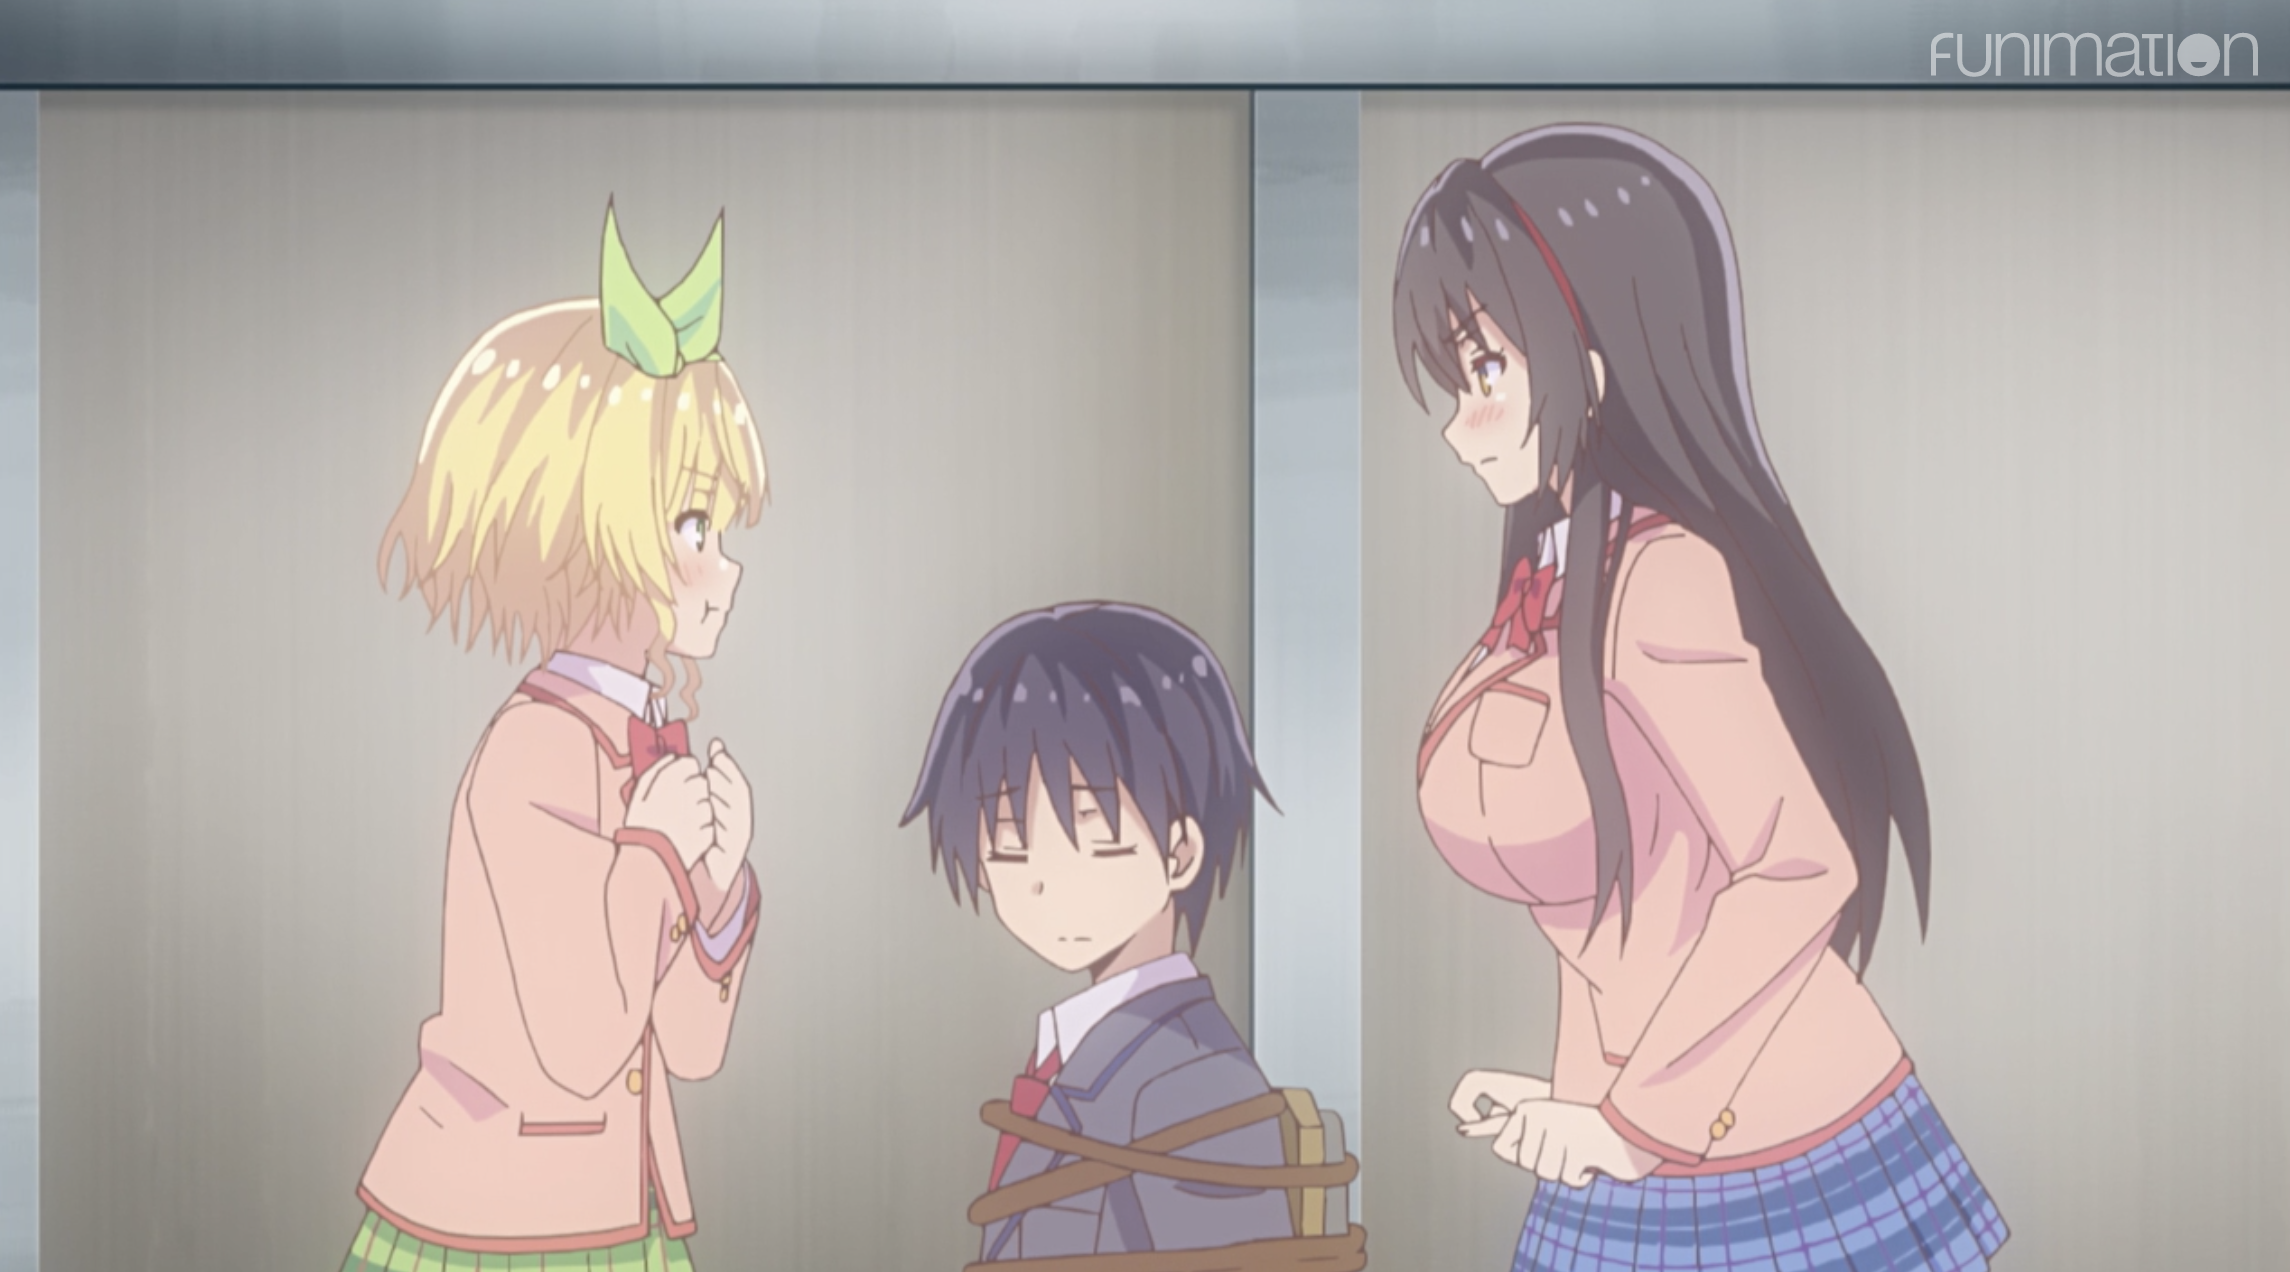 The Verdict: Hensuki: Are You Willing to Fall in Love with a Pervert, as Long as She's a Cutie?